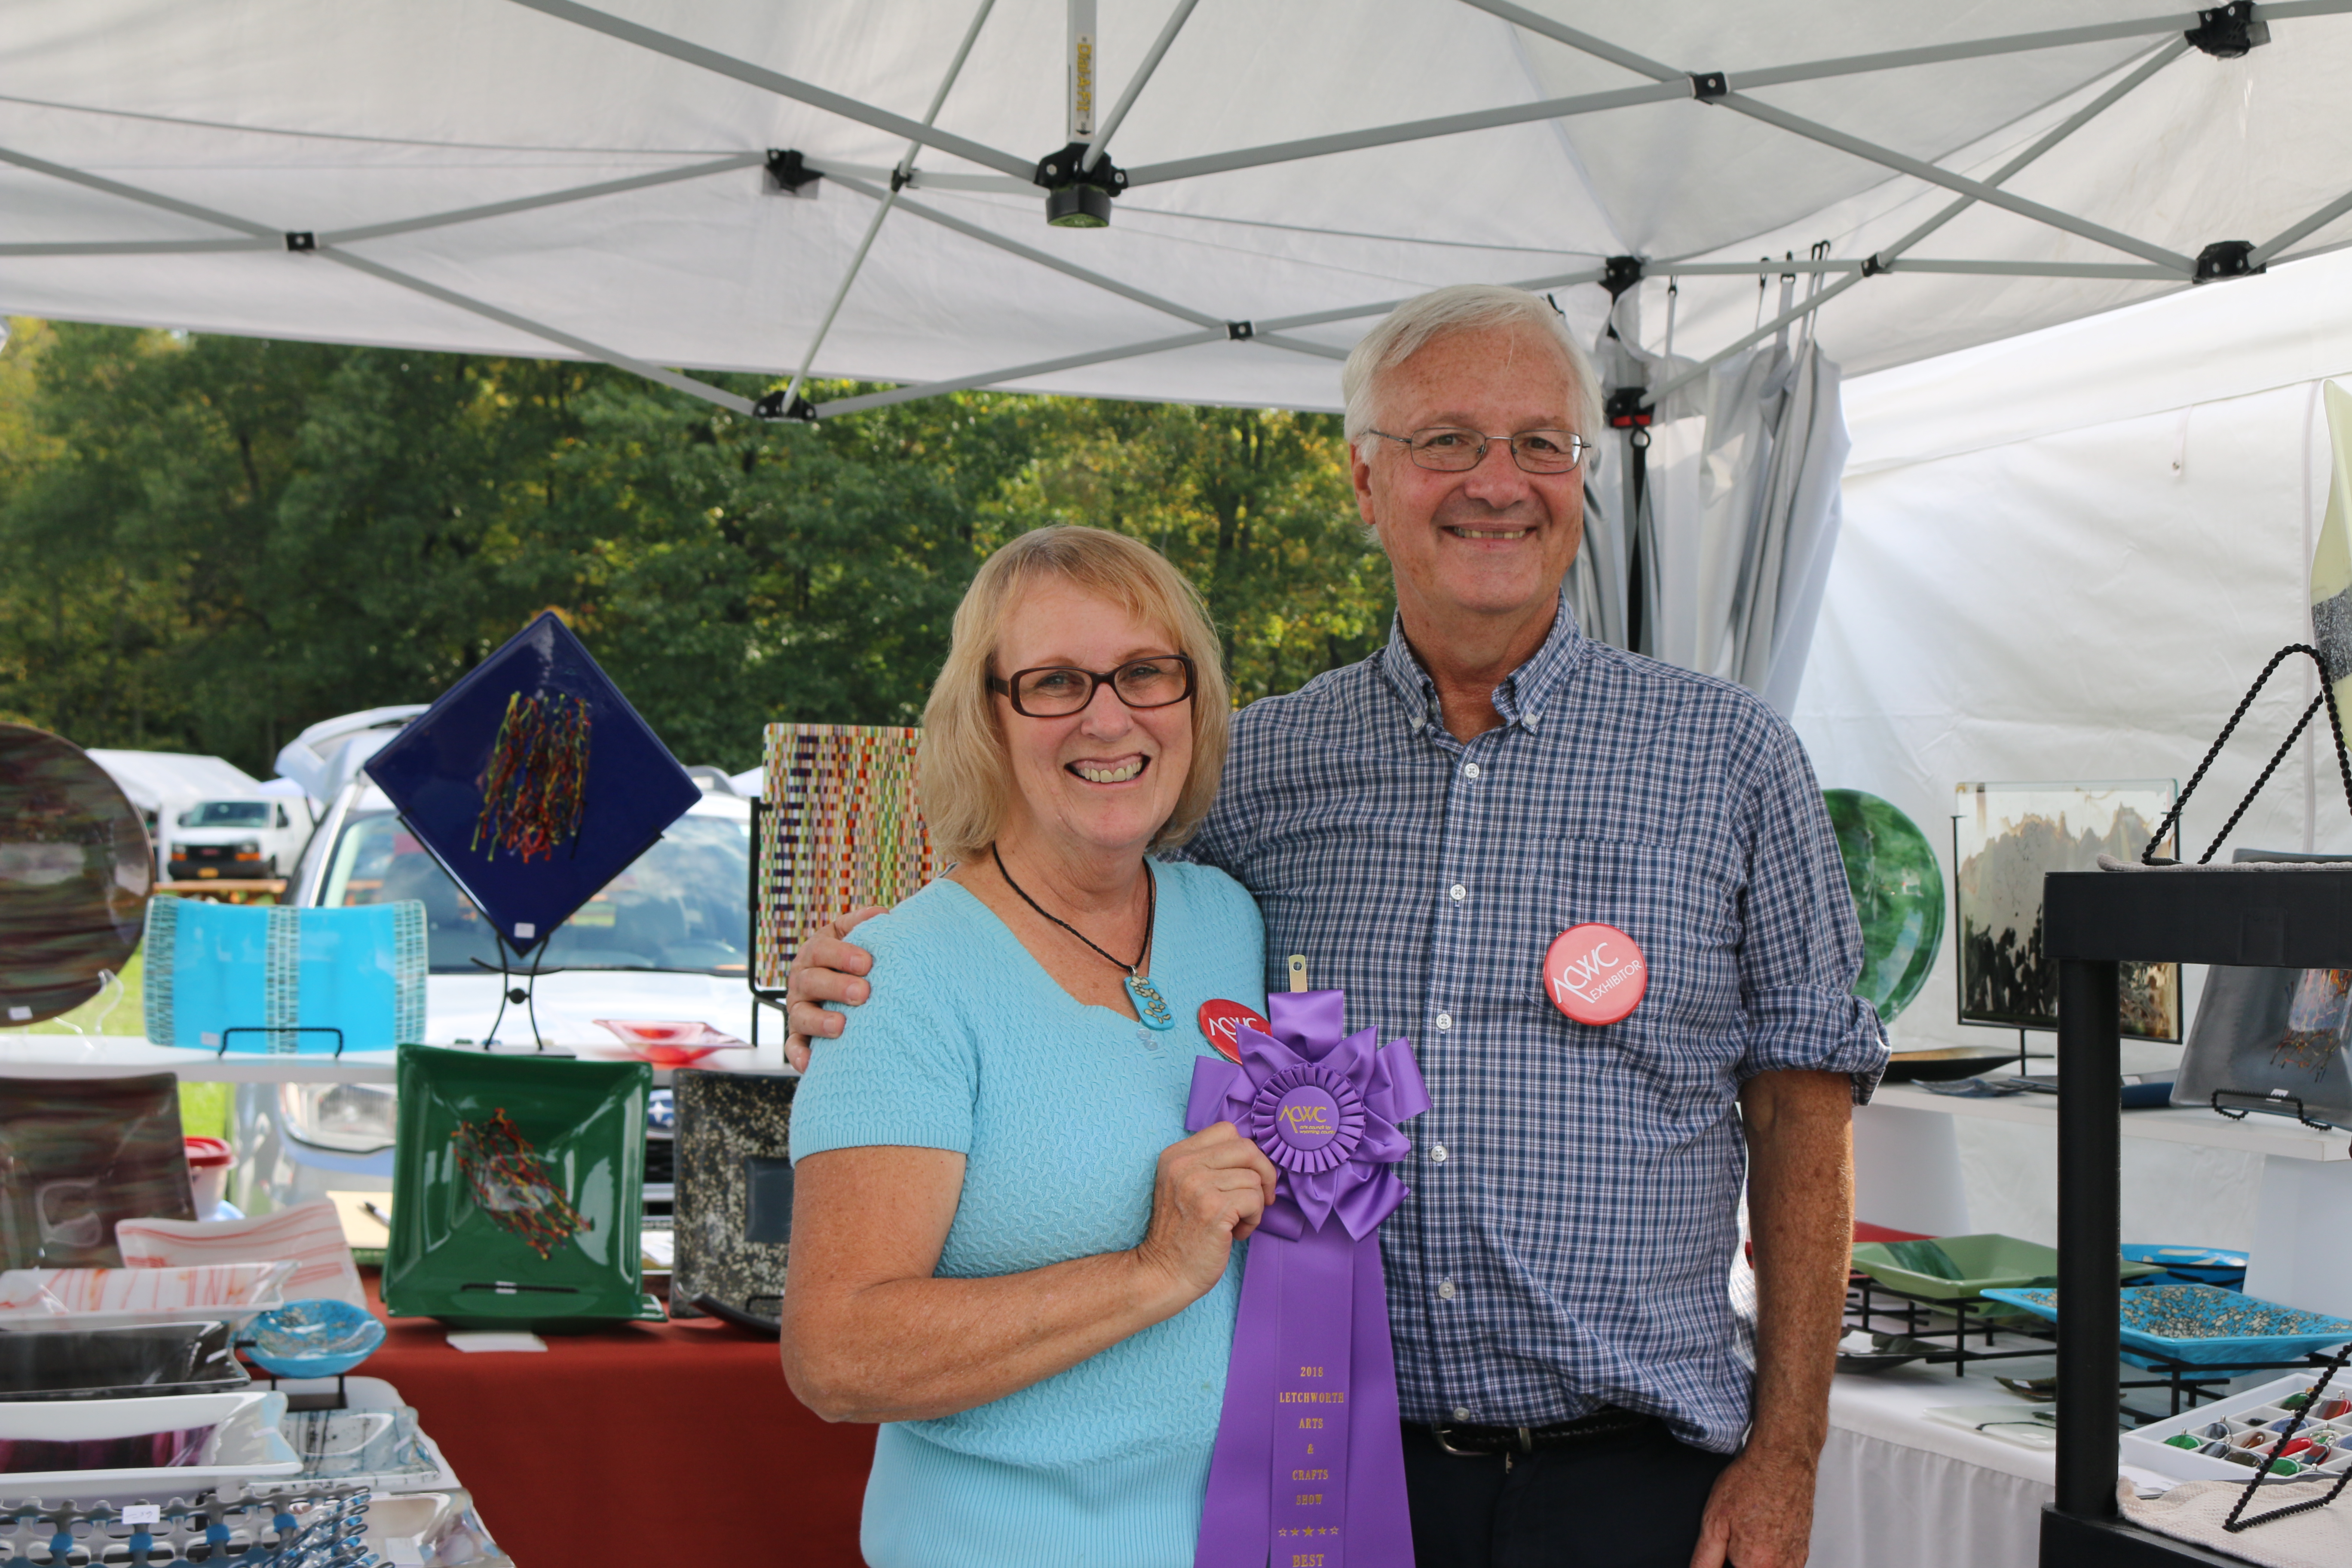 Letchworth Arts and Crafts Show Exhibiting Artists